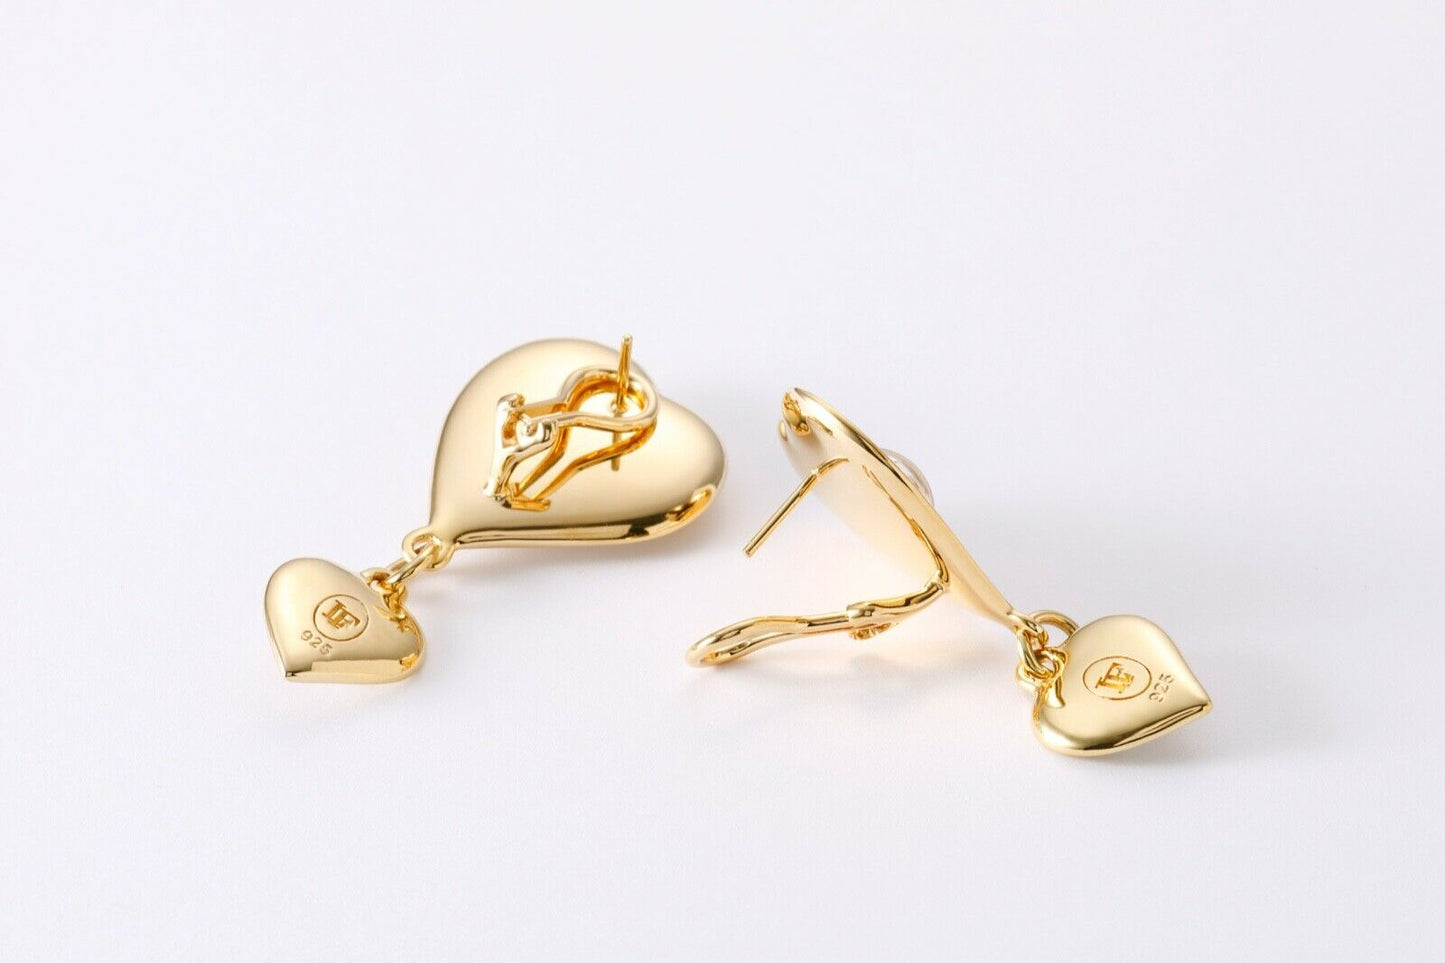 New Heart Dangle Earrings Cabochon Sterling Silver 925 Base 2Mc 24K Gold Plated Gorgeous Swarovski Crystal